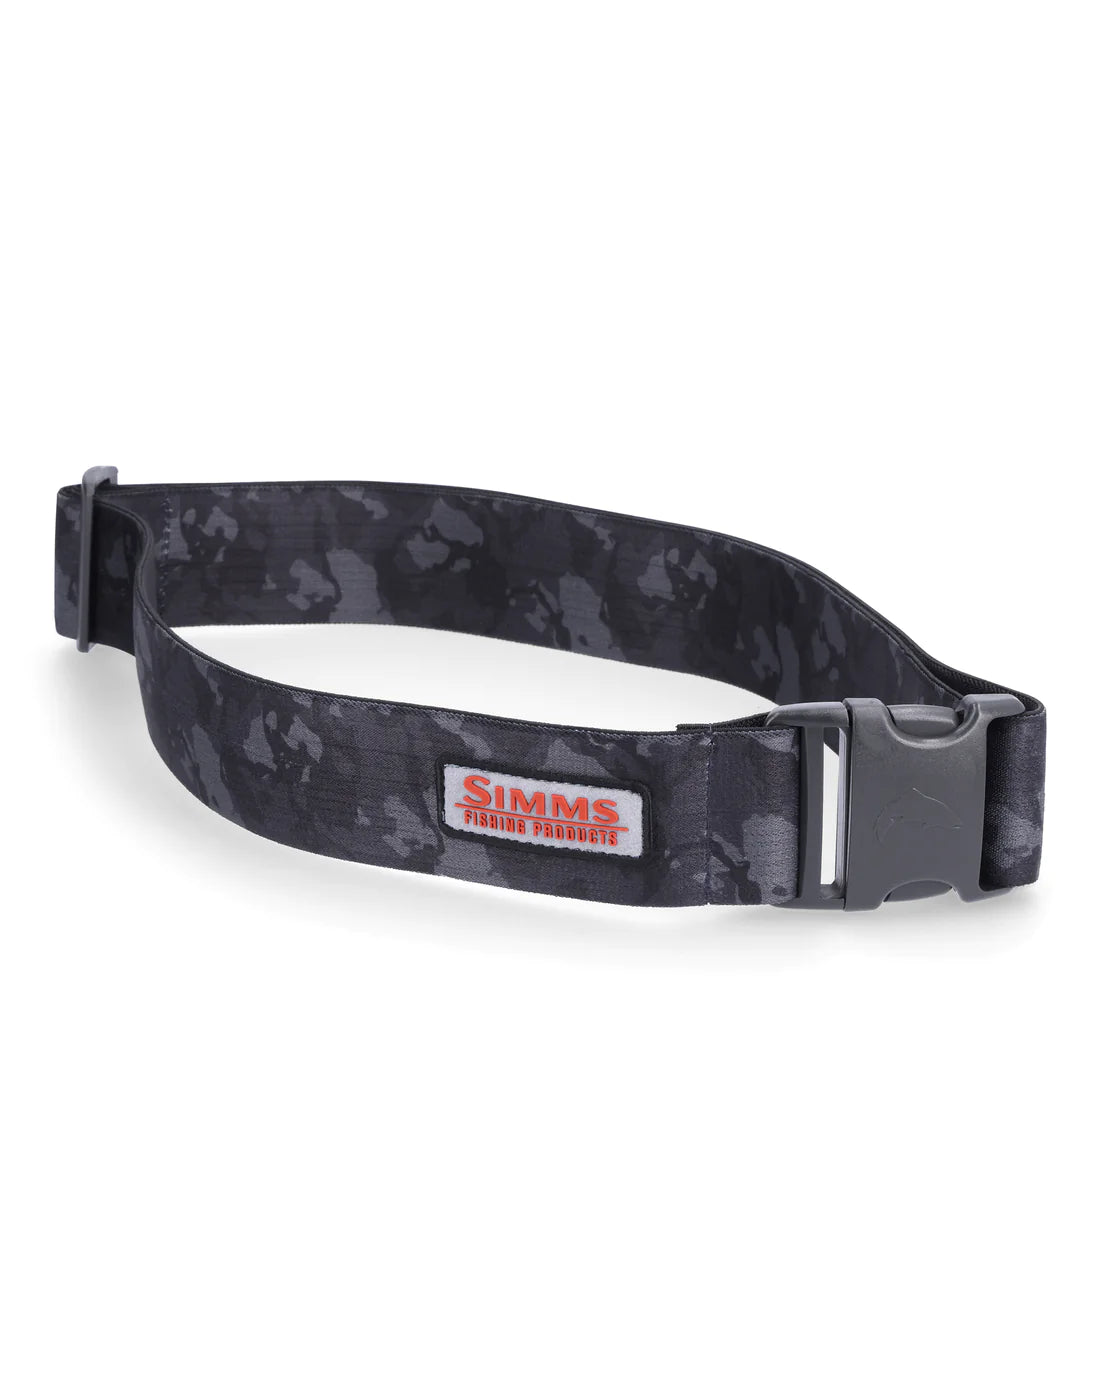 Simms Wading Belt 2" - REGIMENT CAMO CARBON - Mansfield Hunting & Fishing - Products to prepare for Corona Virus